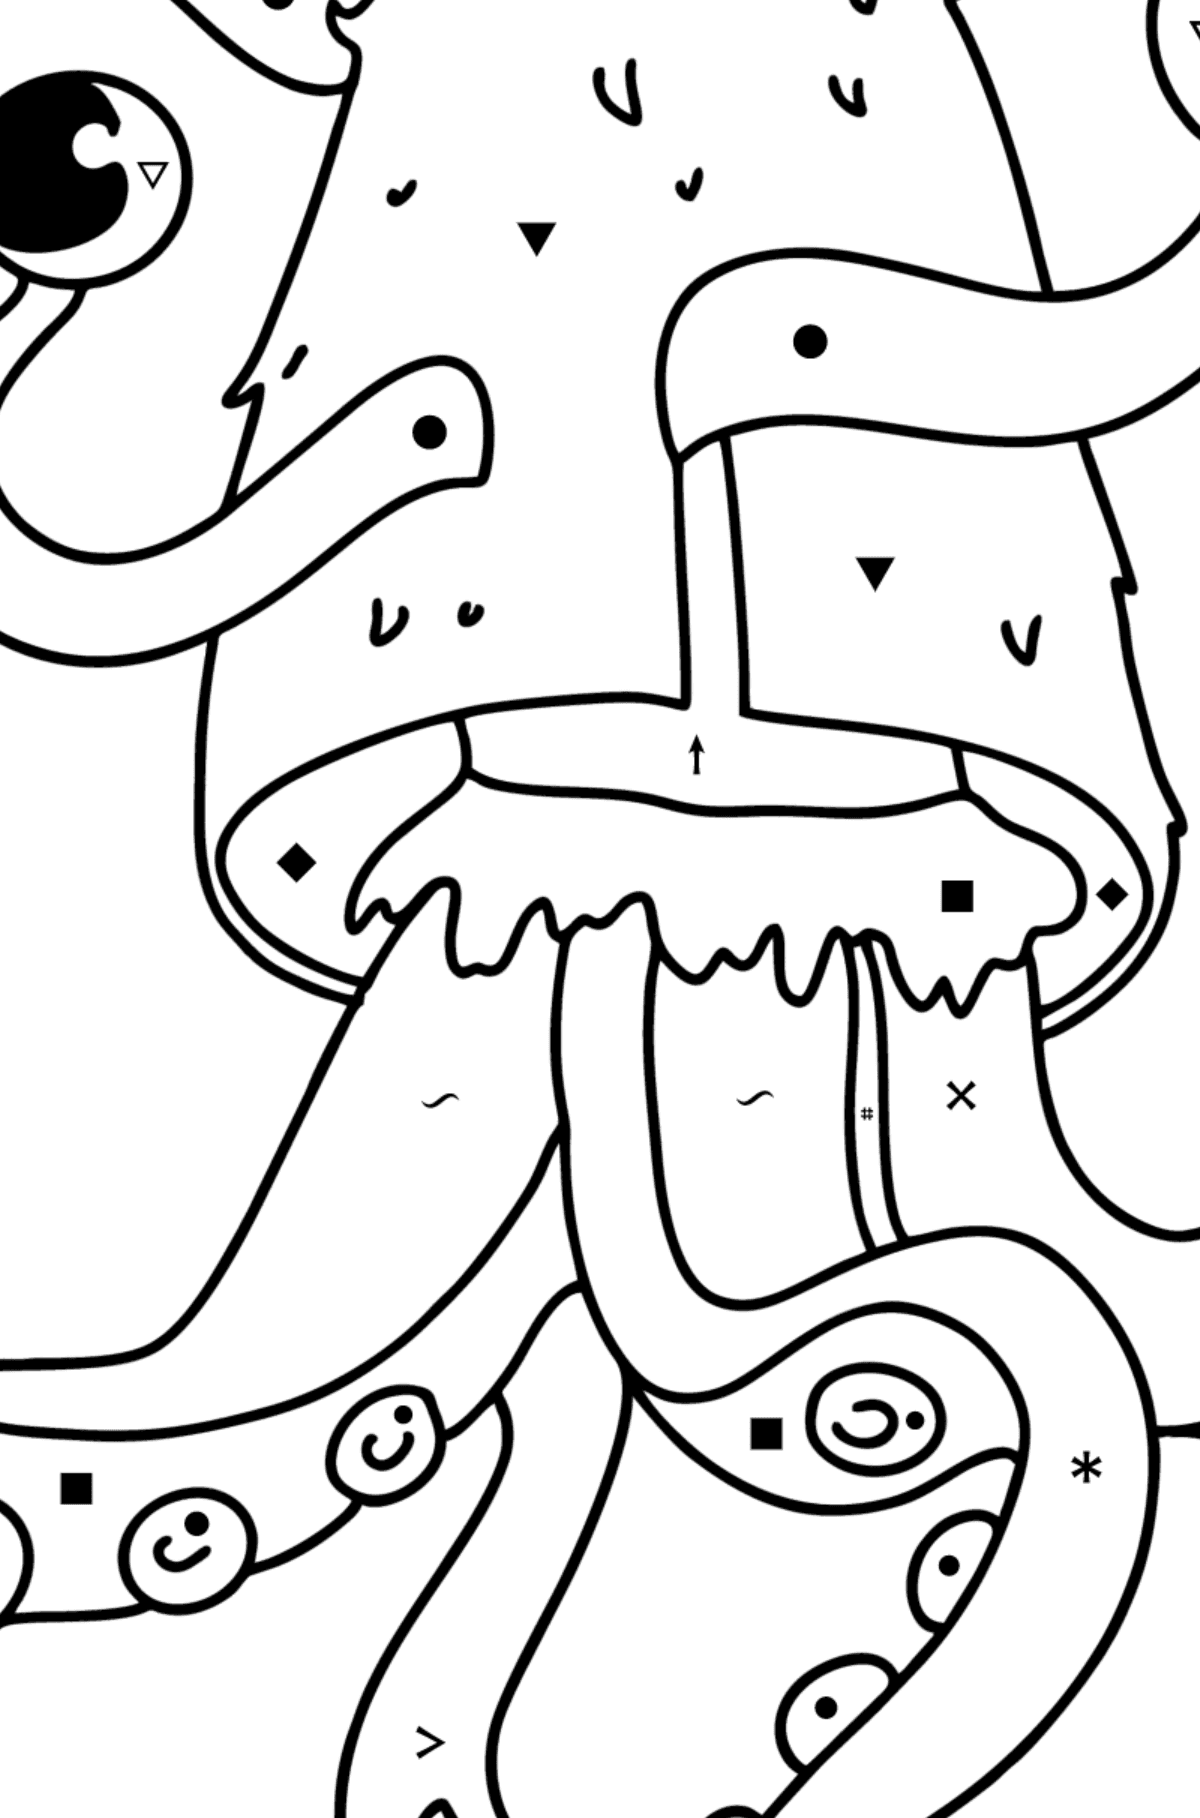 Monster Alien coloring page - Coloring by Symbols for Kids